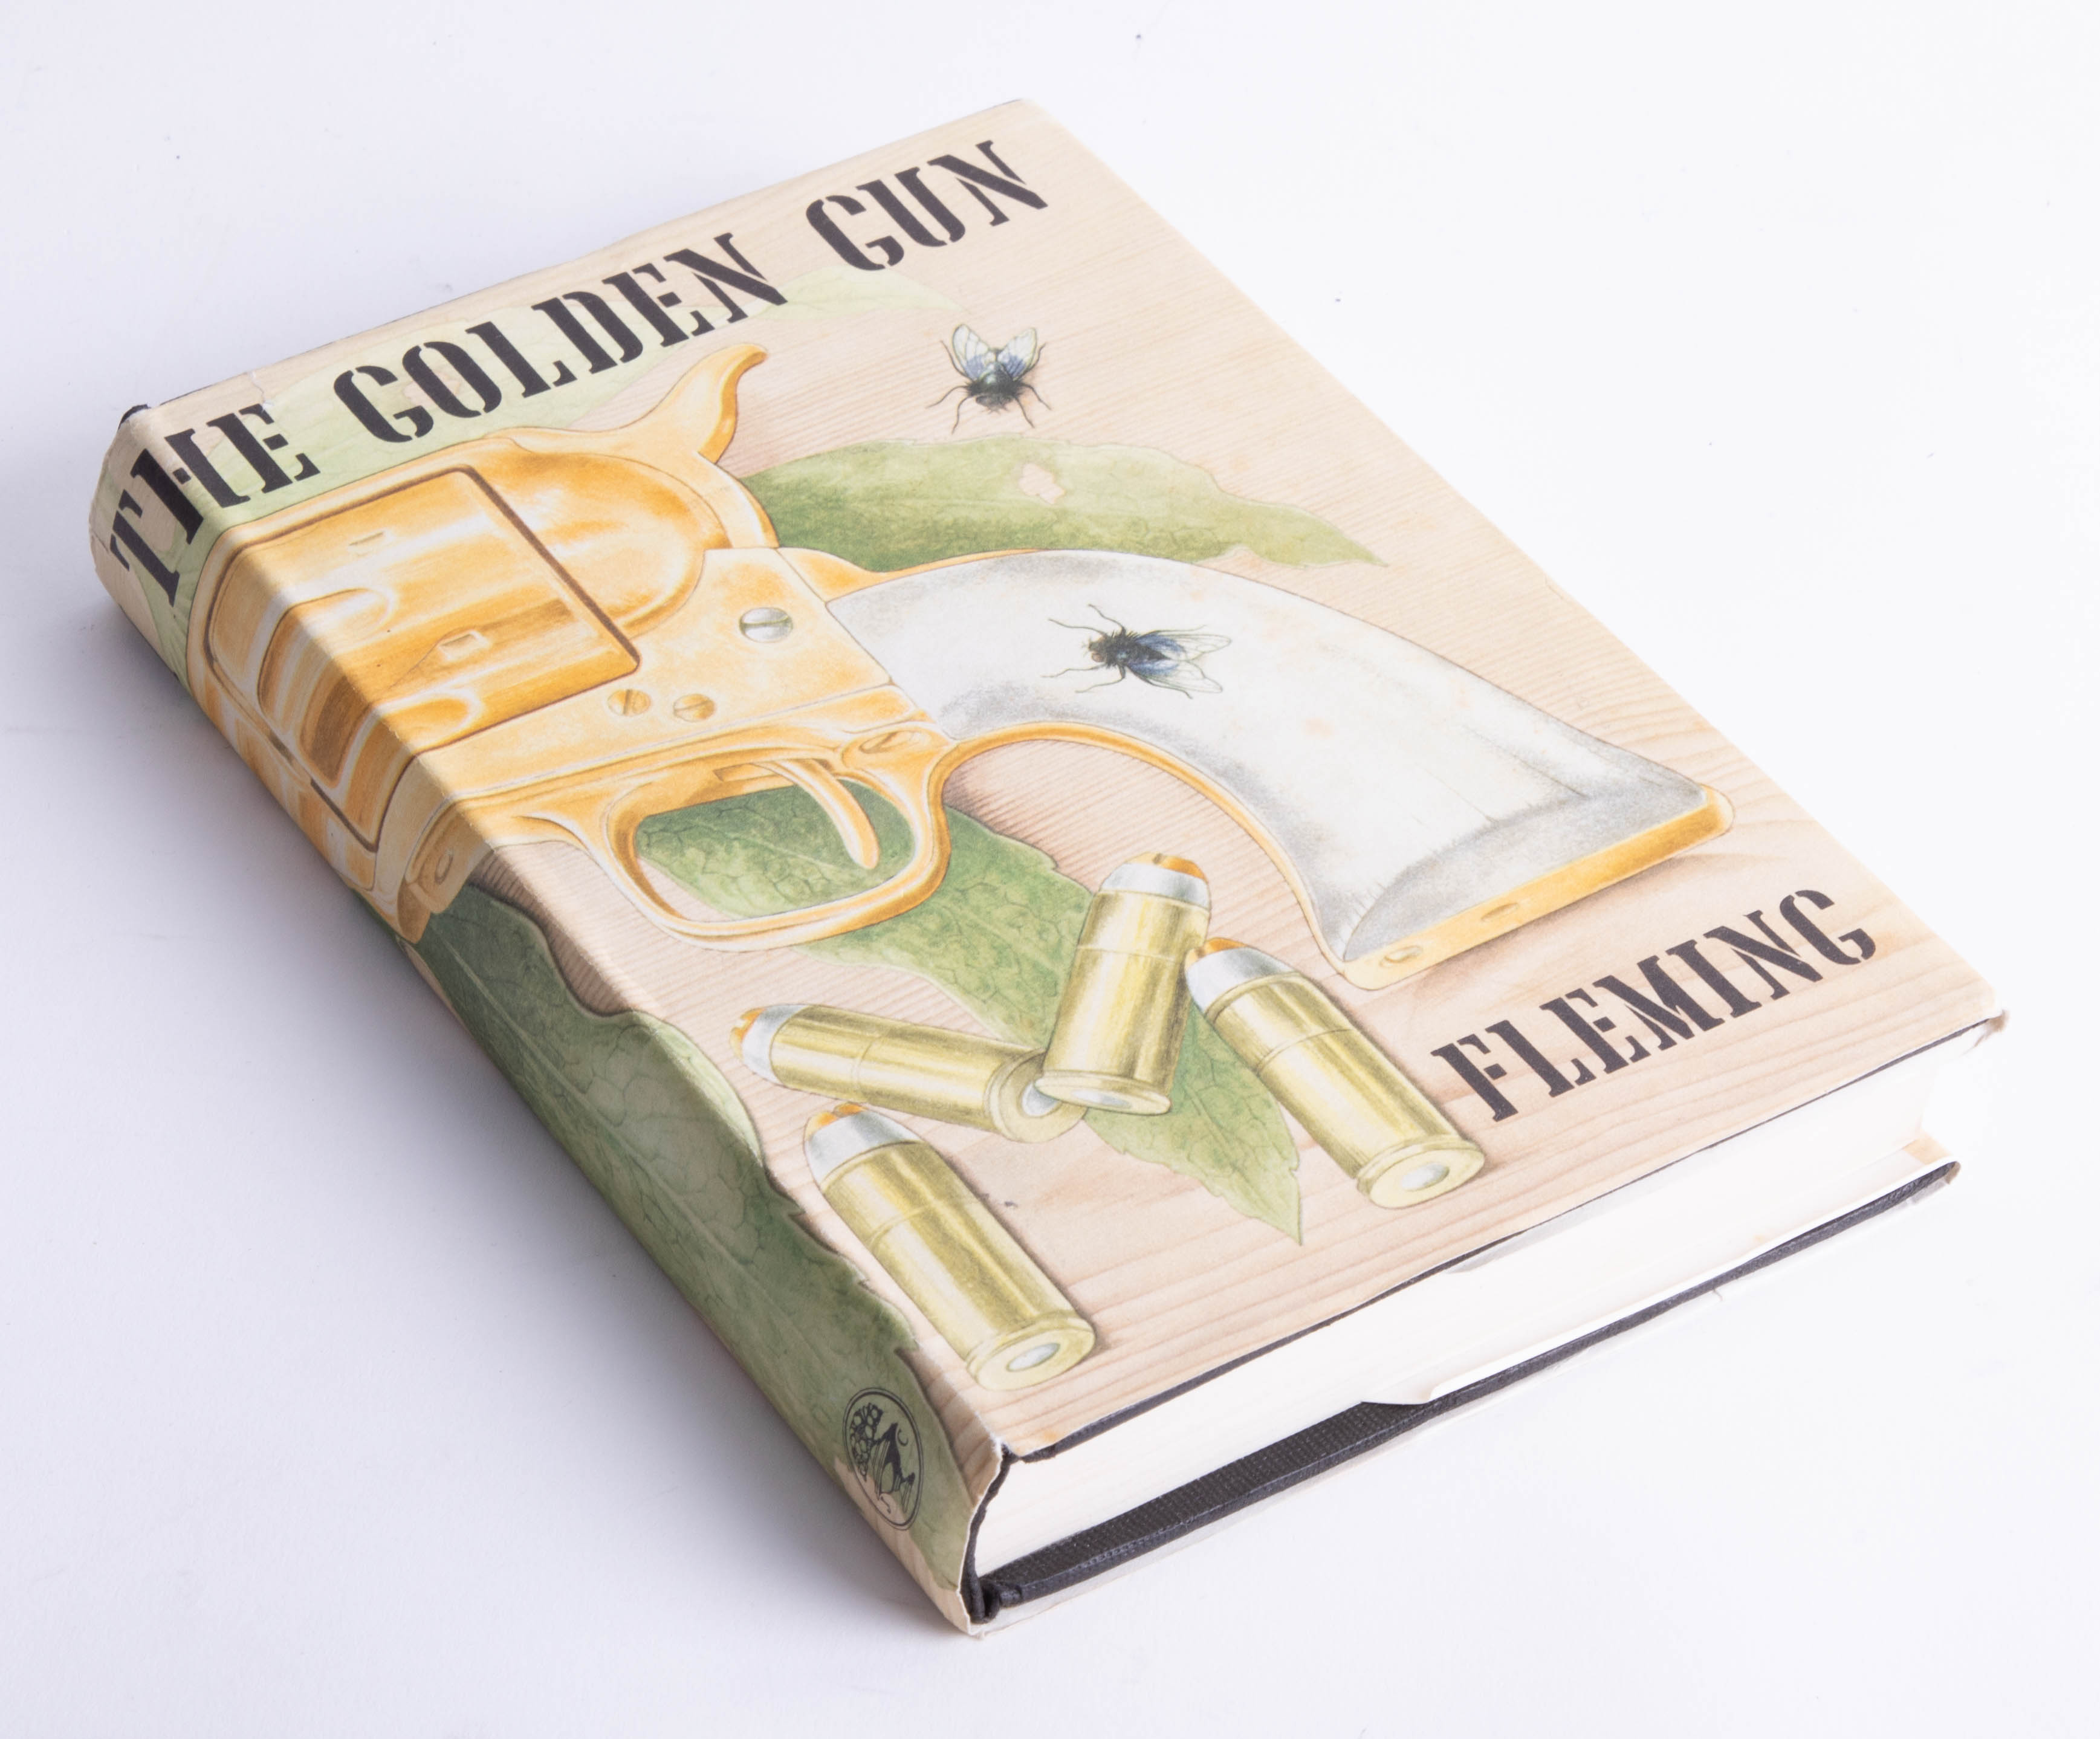 Ian Fleming, 'The Man with the Golden Gun', 1965 first edition/first impression.